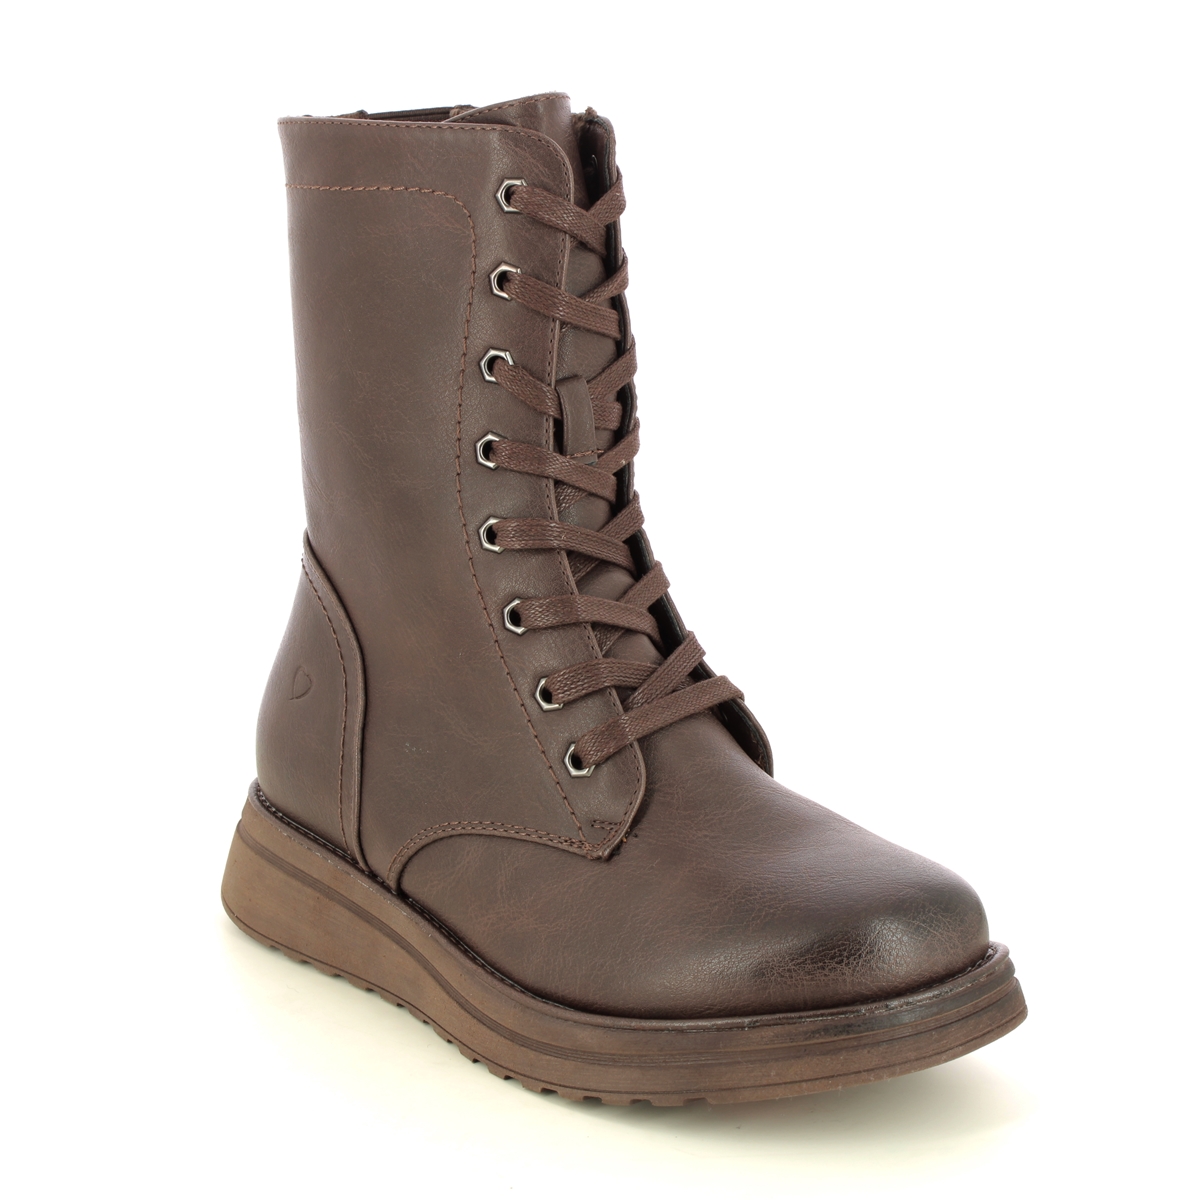 Heavenly Feet Martina Walker Chocolate brown Womens Lace Up Boots 3509-27 in a Plain Man-made in Size 5